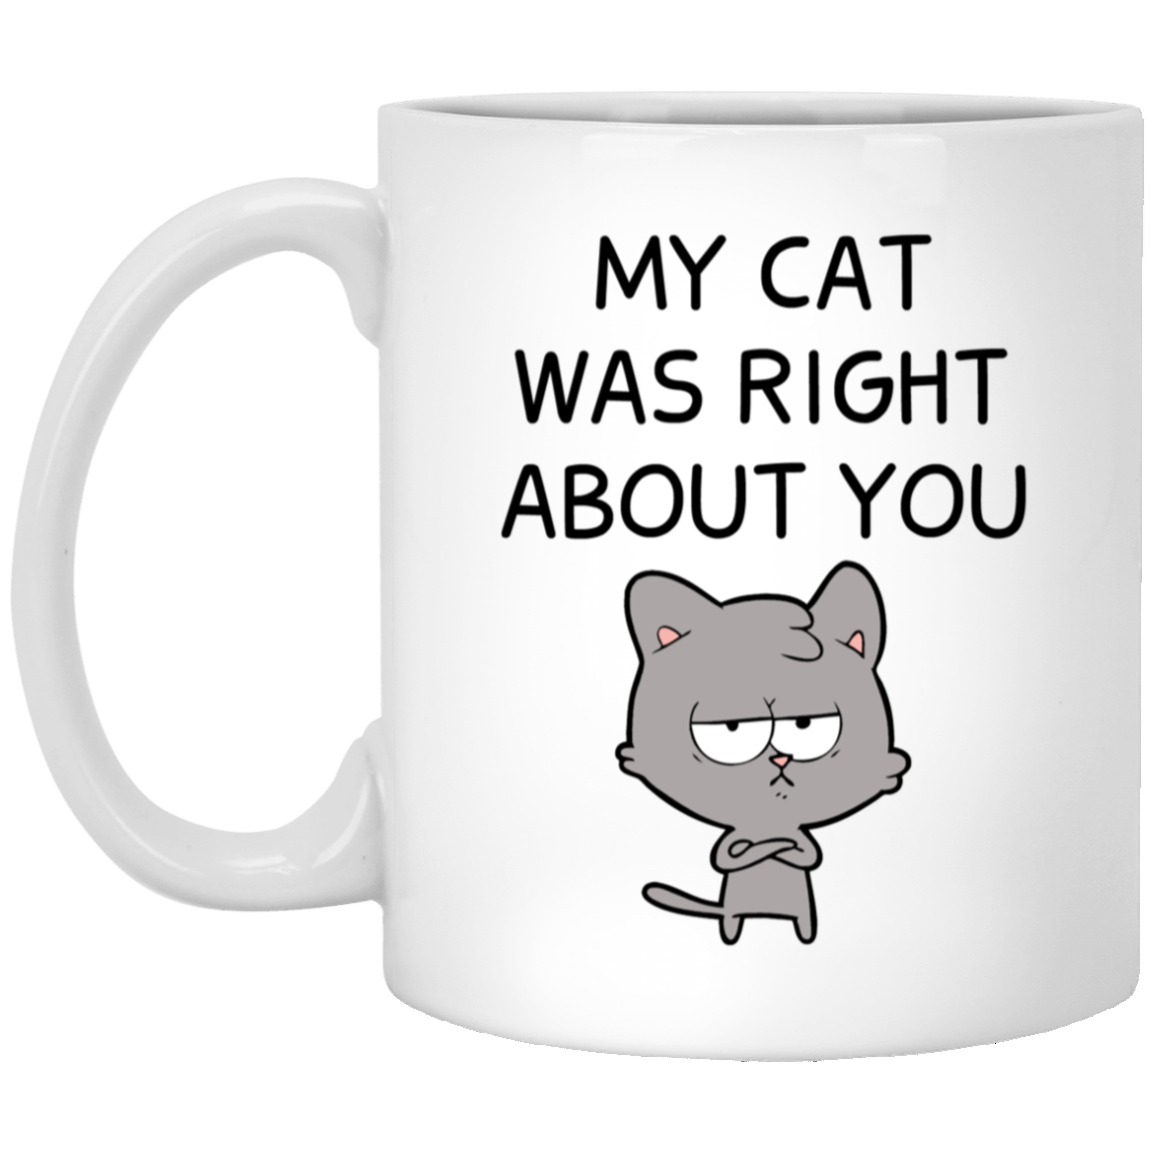 My Cat Was Right About You Mug Funny Cat Coffee Cup